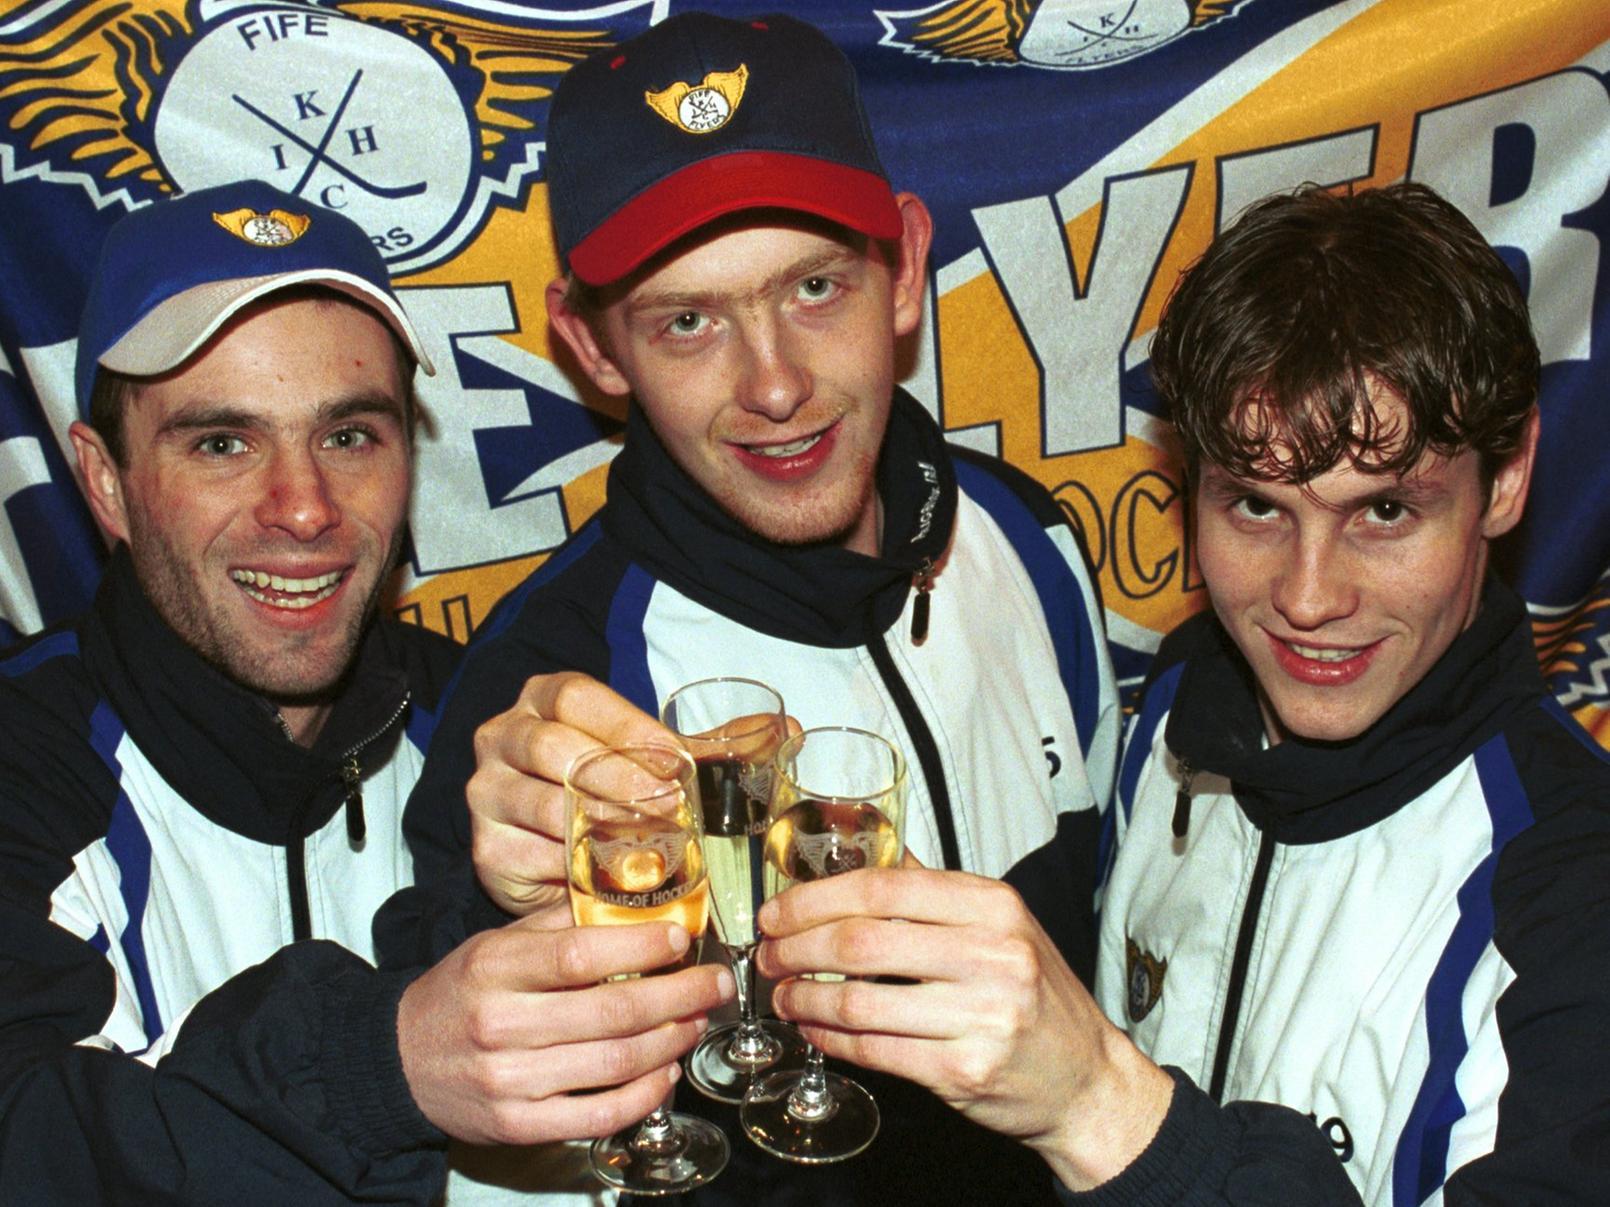 Raising a glass - Andy Finlay, Kyle Horne and Gary Wishart